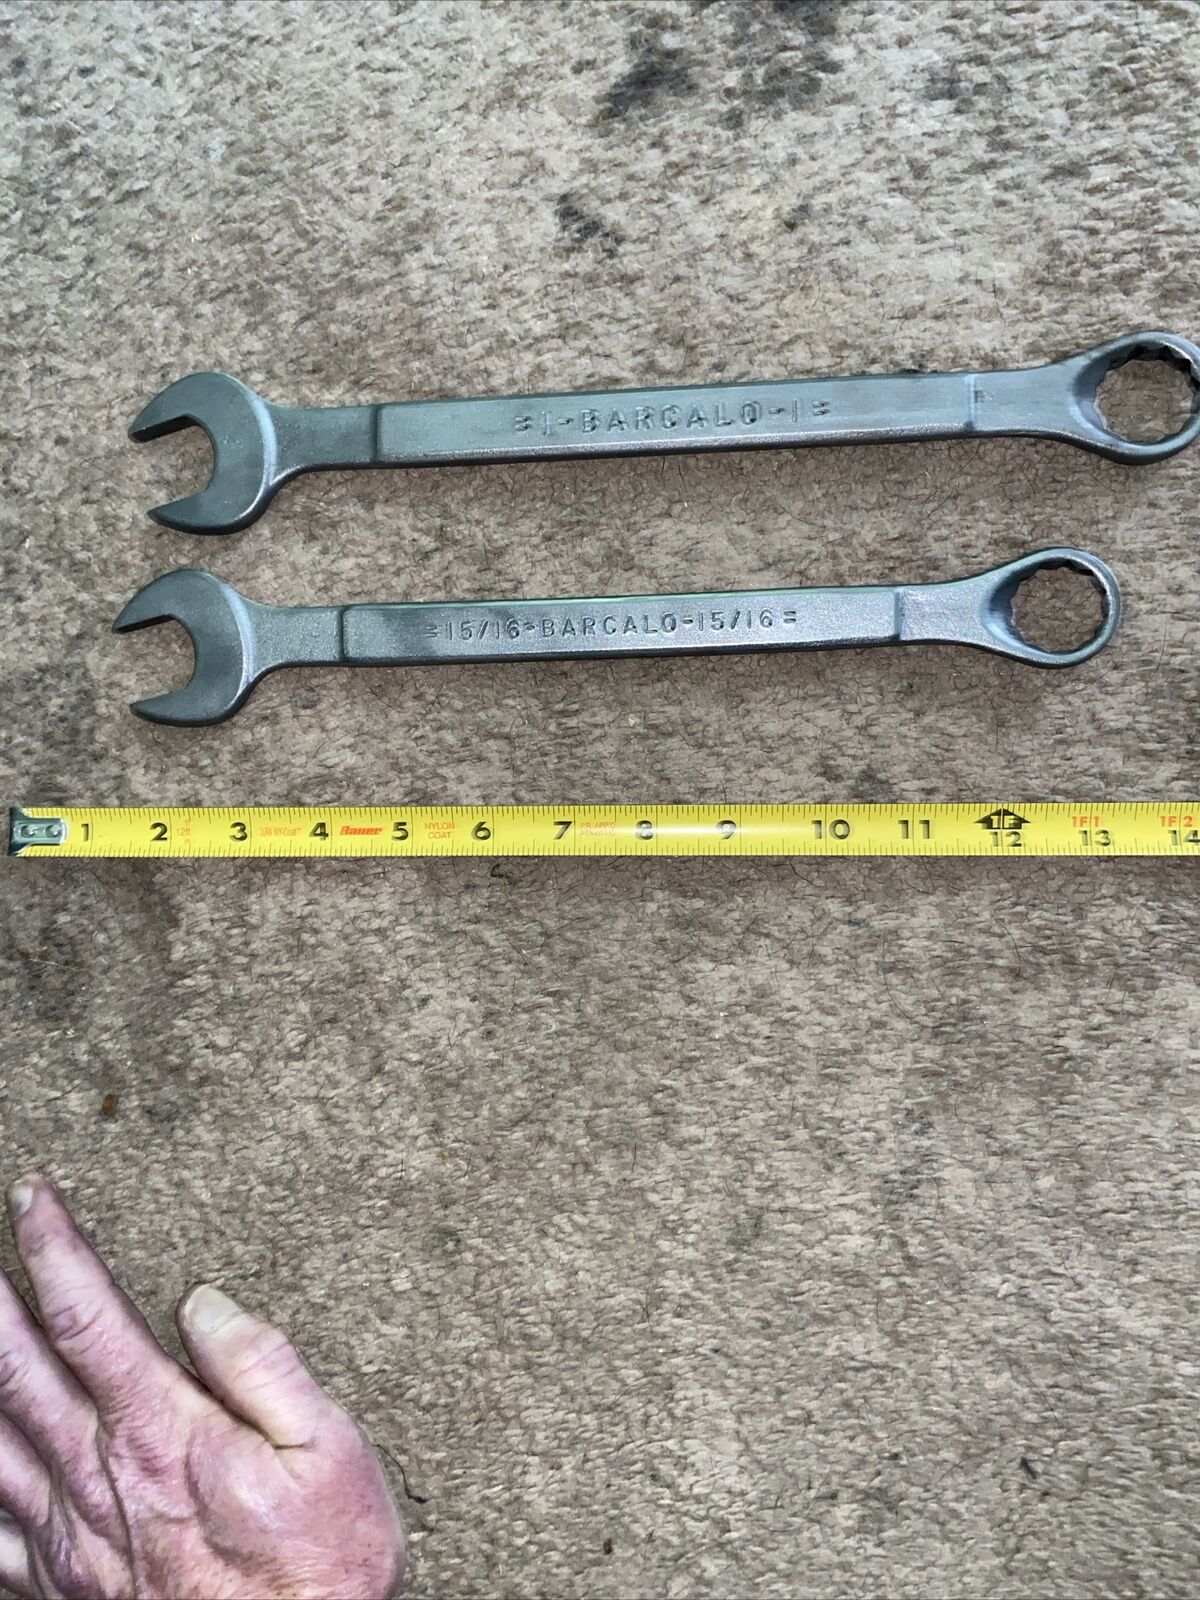 2 Vintage Barcalo Combination Wrenches Forged USA 1” $ 15/16”  Rare